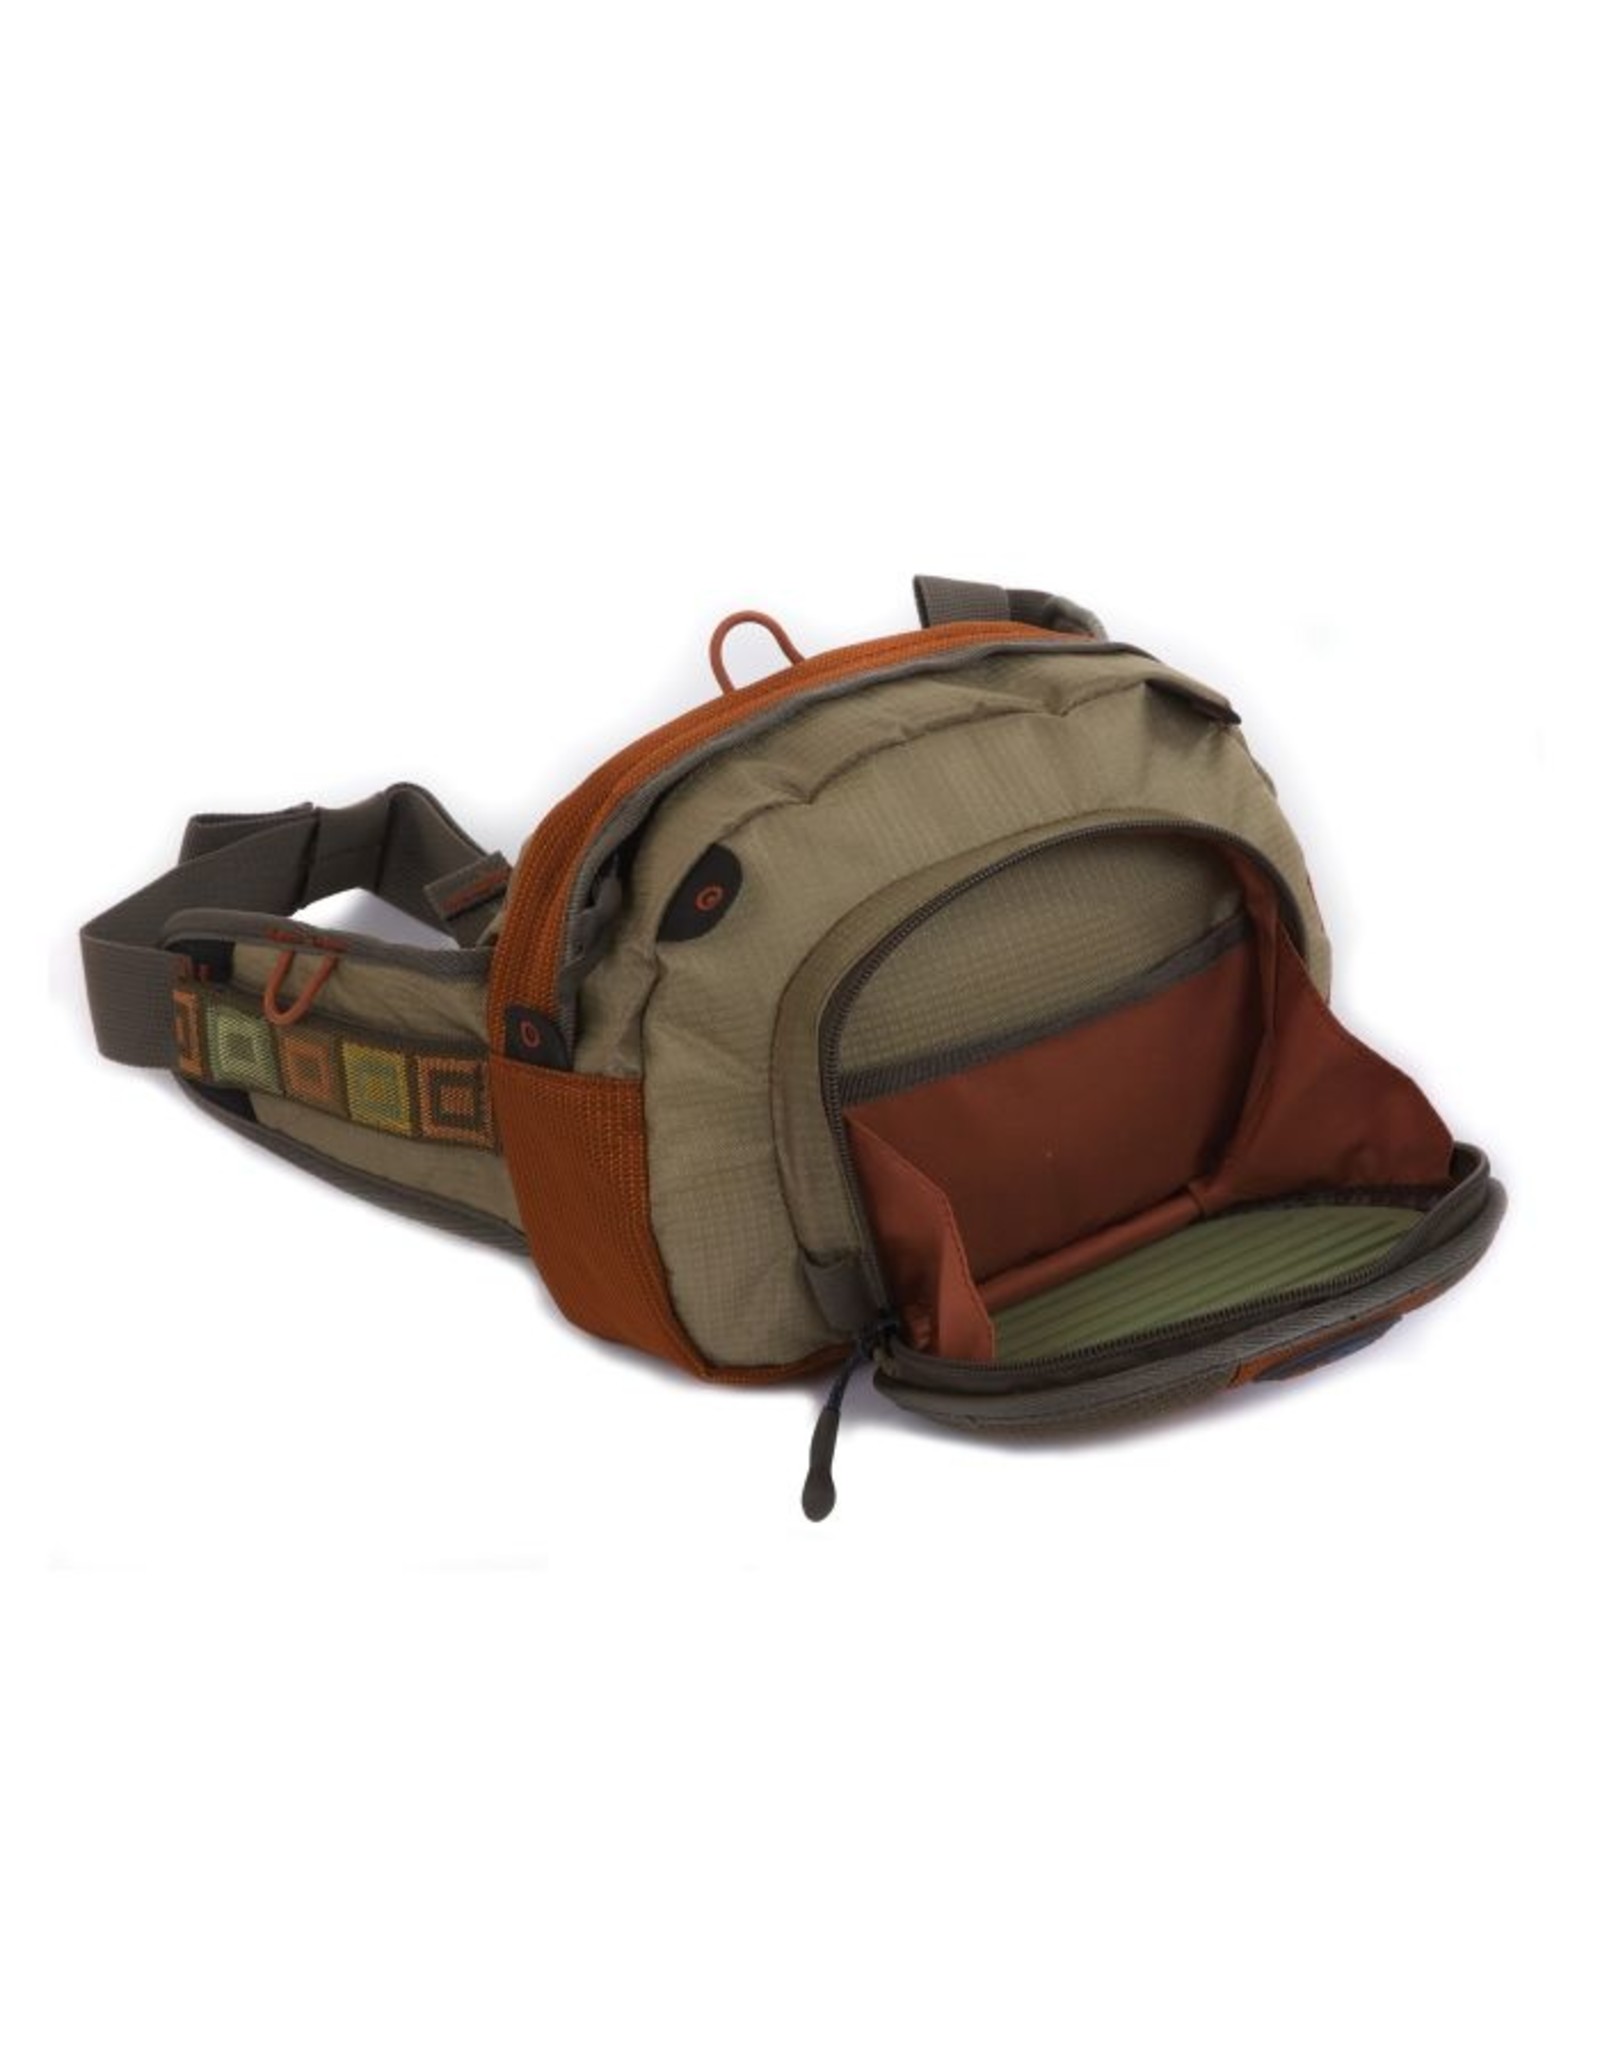 Fishpond Fishpond - Arroyo Chest Pack